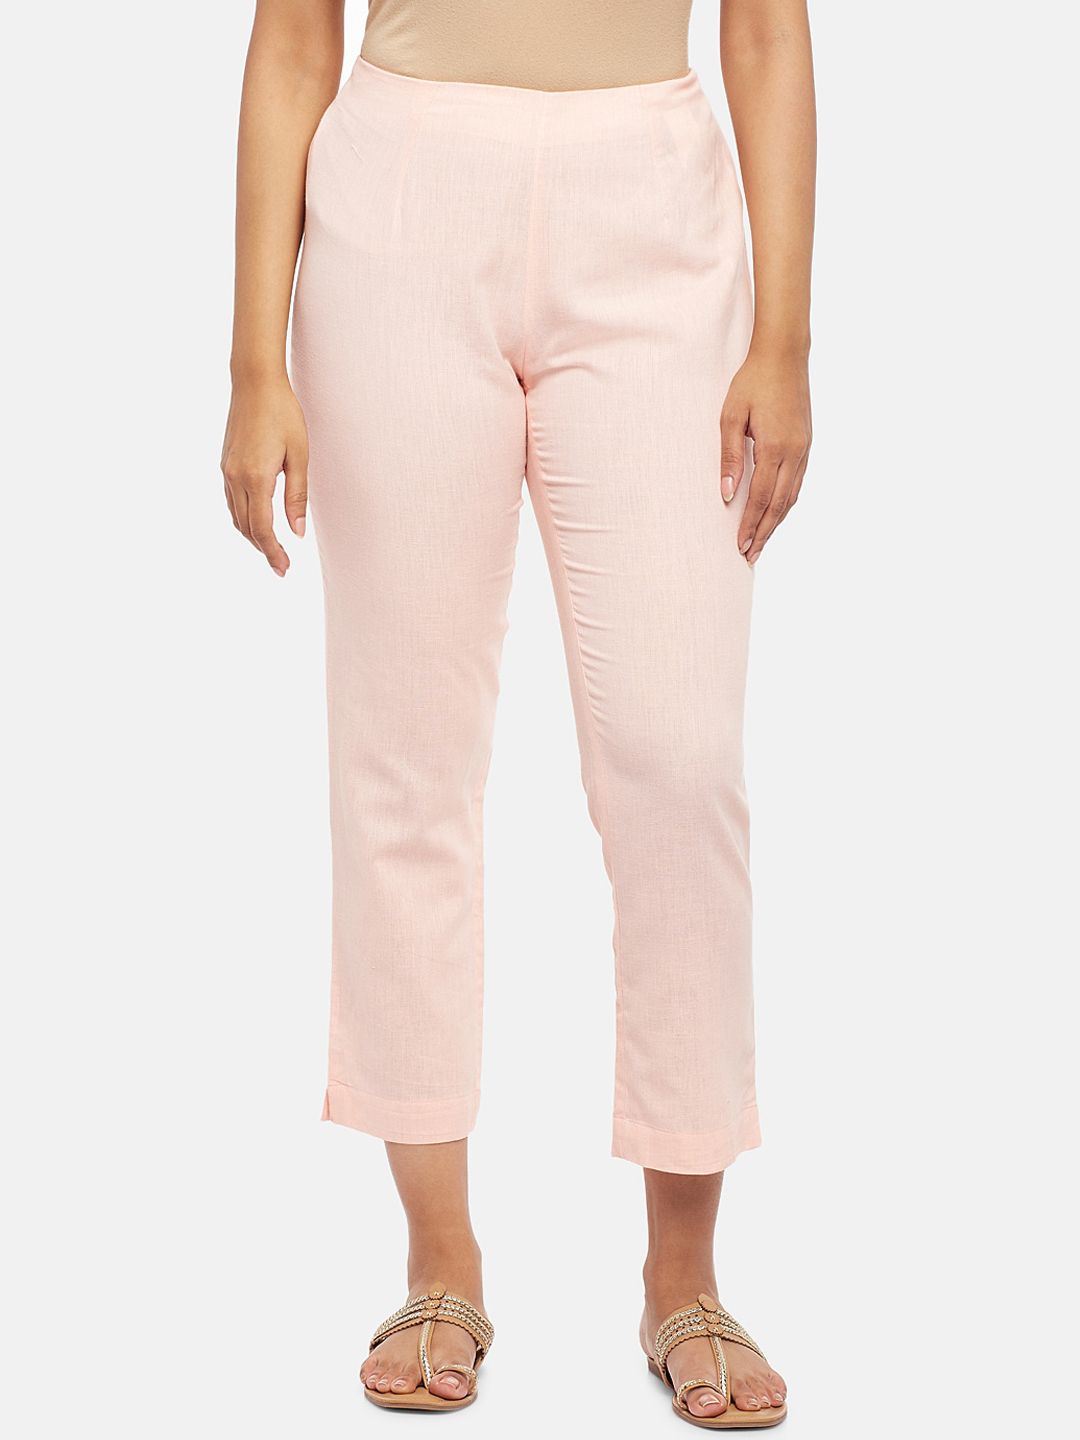 RANGMANCH BY PANTALOONS Women Pink Trousers Price in India